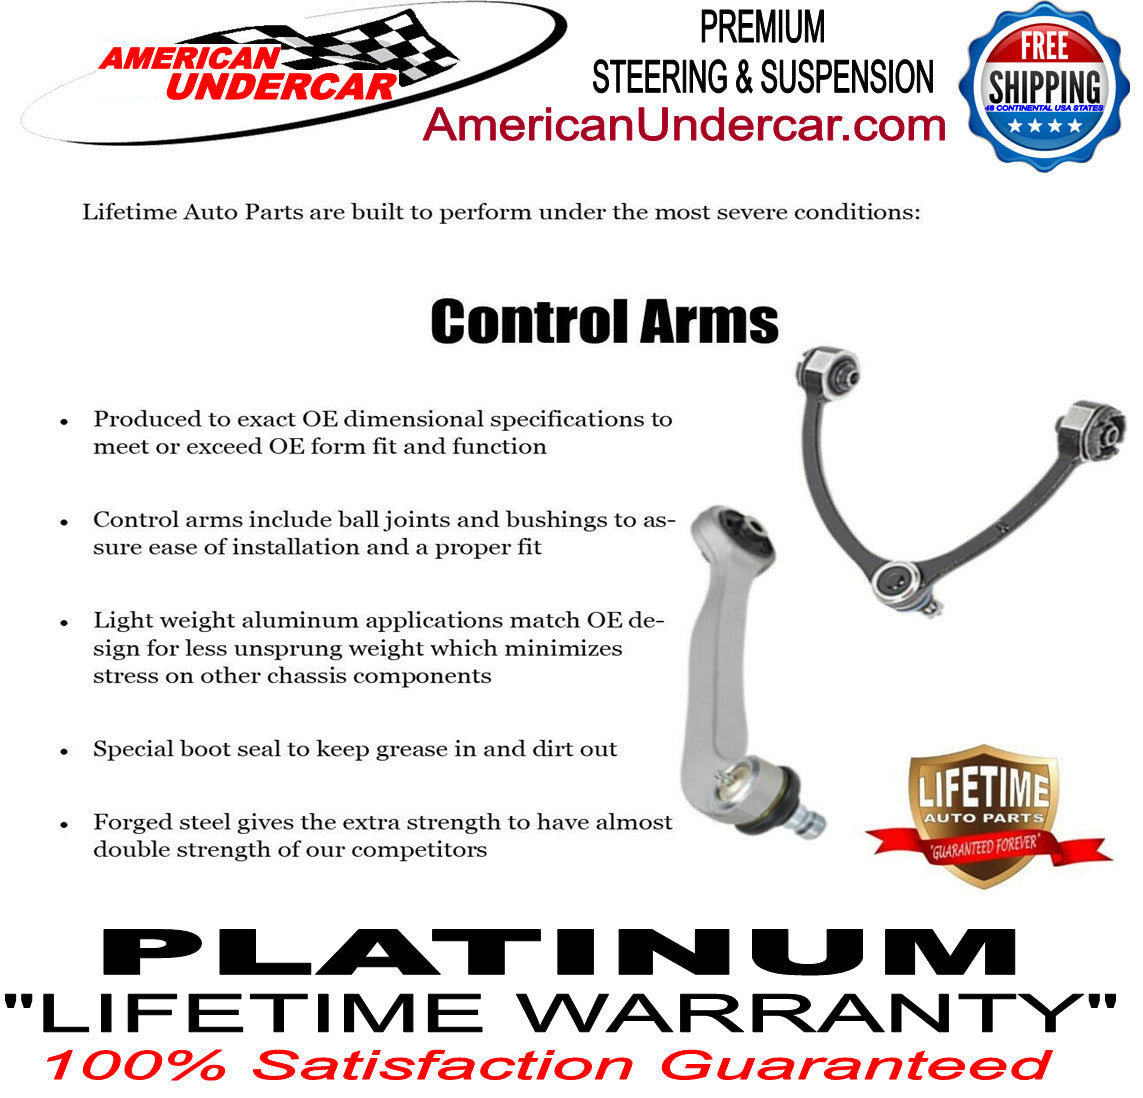 Lifetime Ball Joint Upper & Lower Suspension Kit for 1994-2004 Ford F450, F550 Super Duty, Mono Beam axle